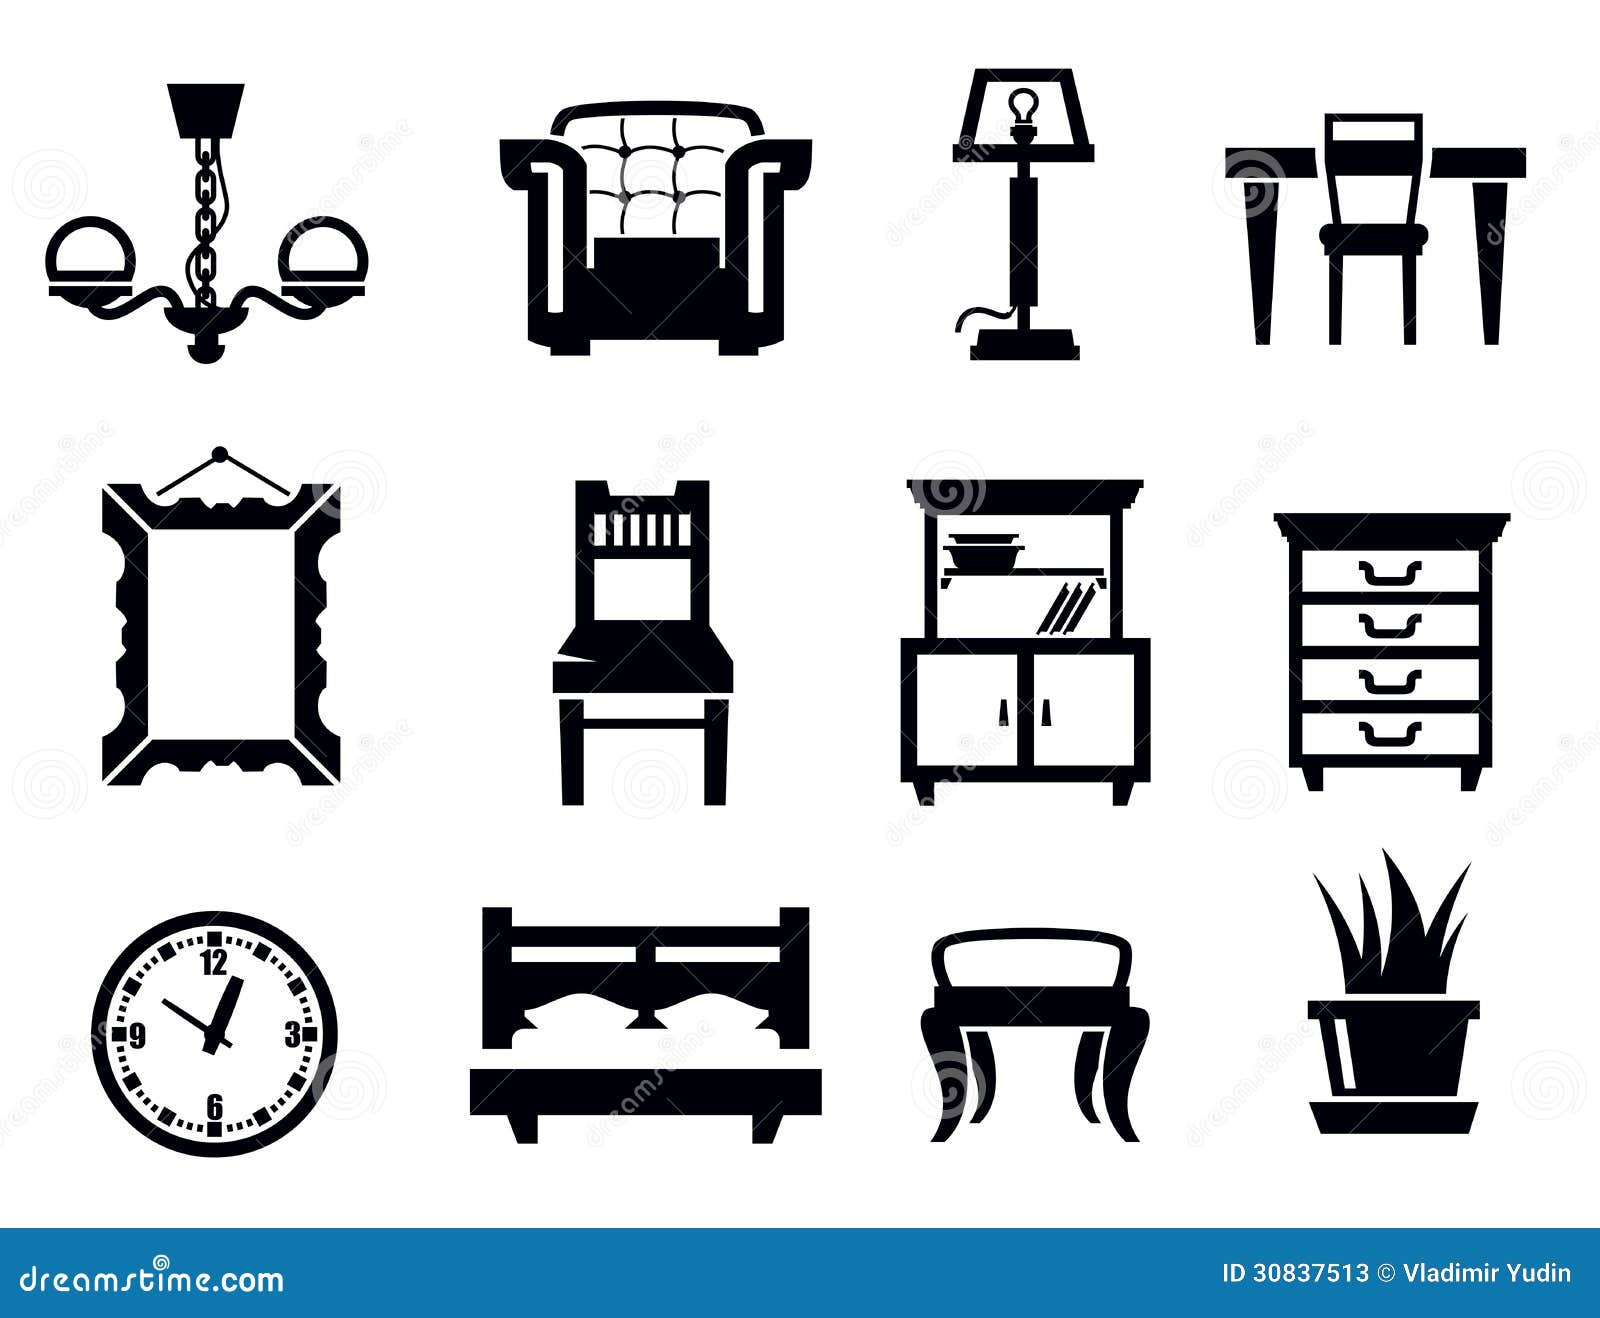 furniture vector clipart - photo #11